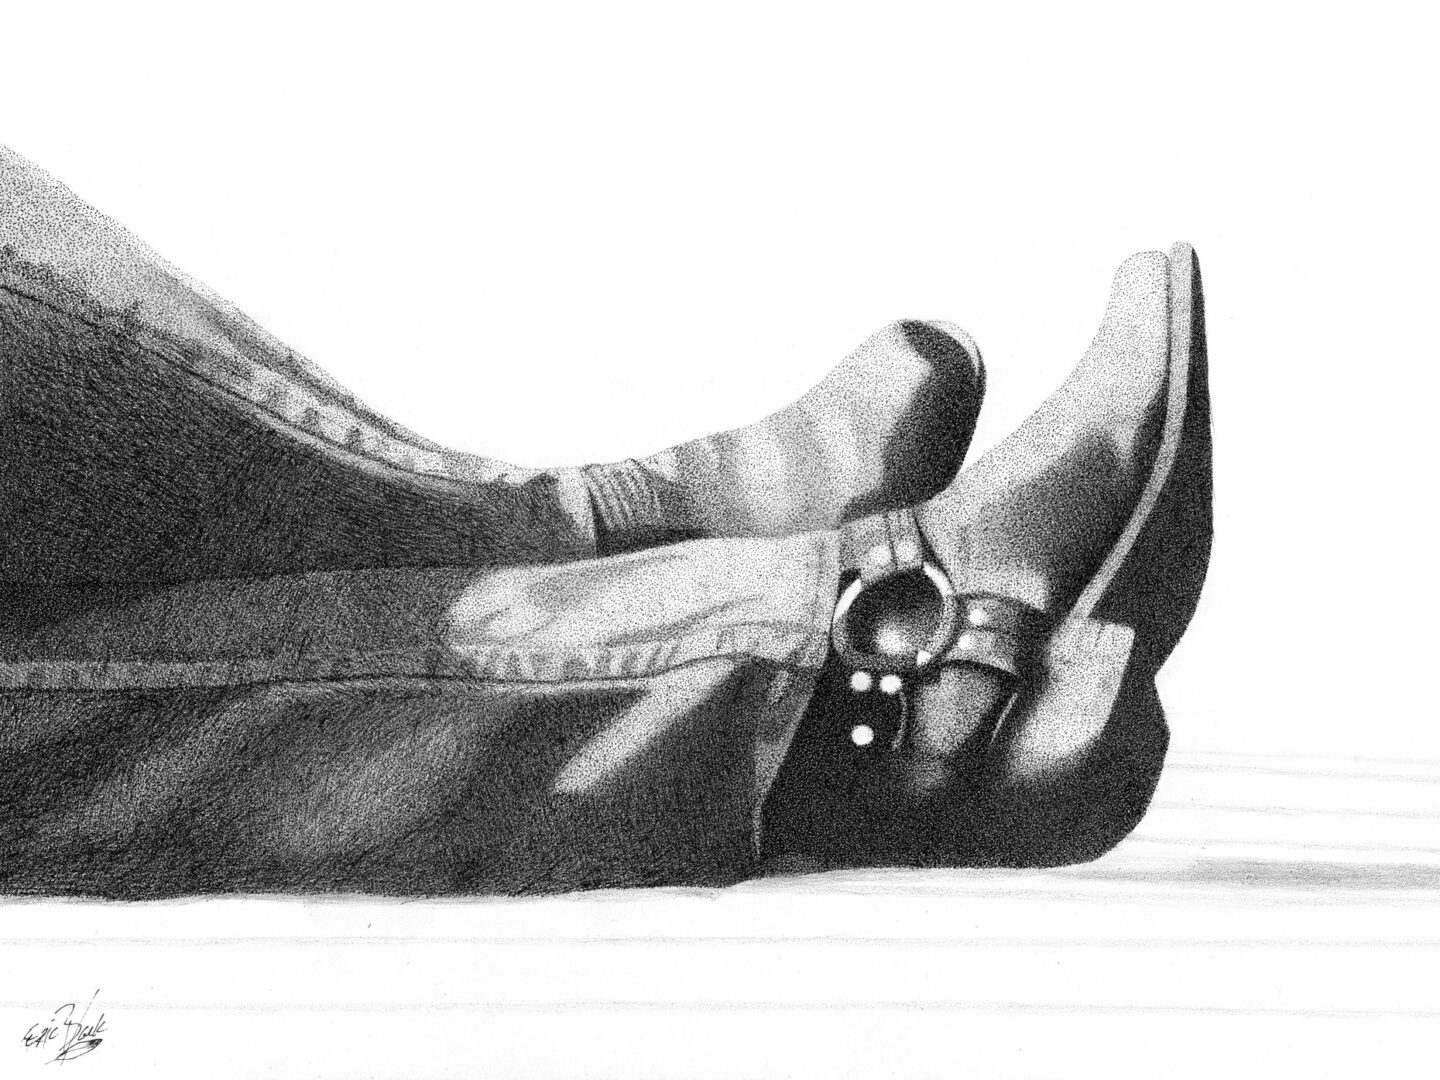 A drawing of someone 's feet in jeans and boots.